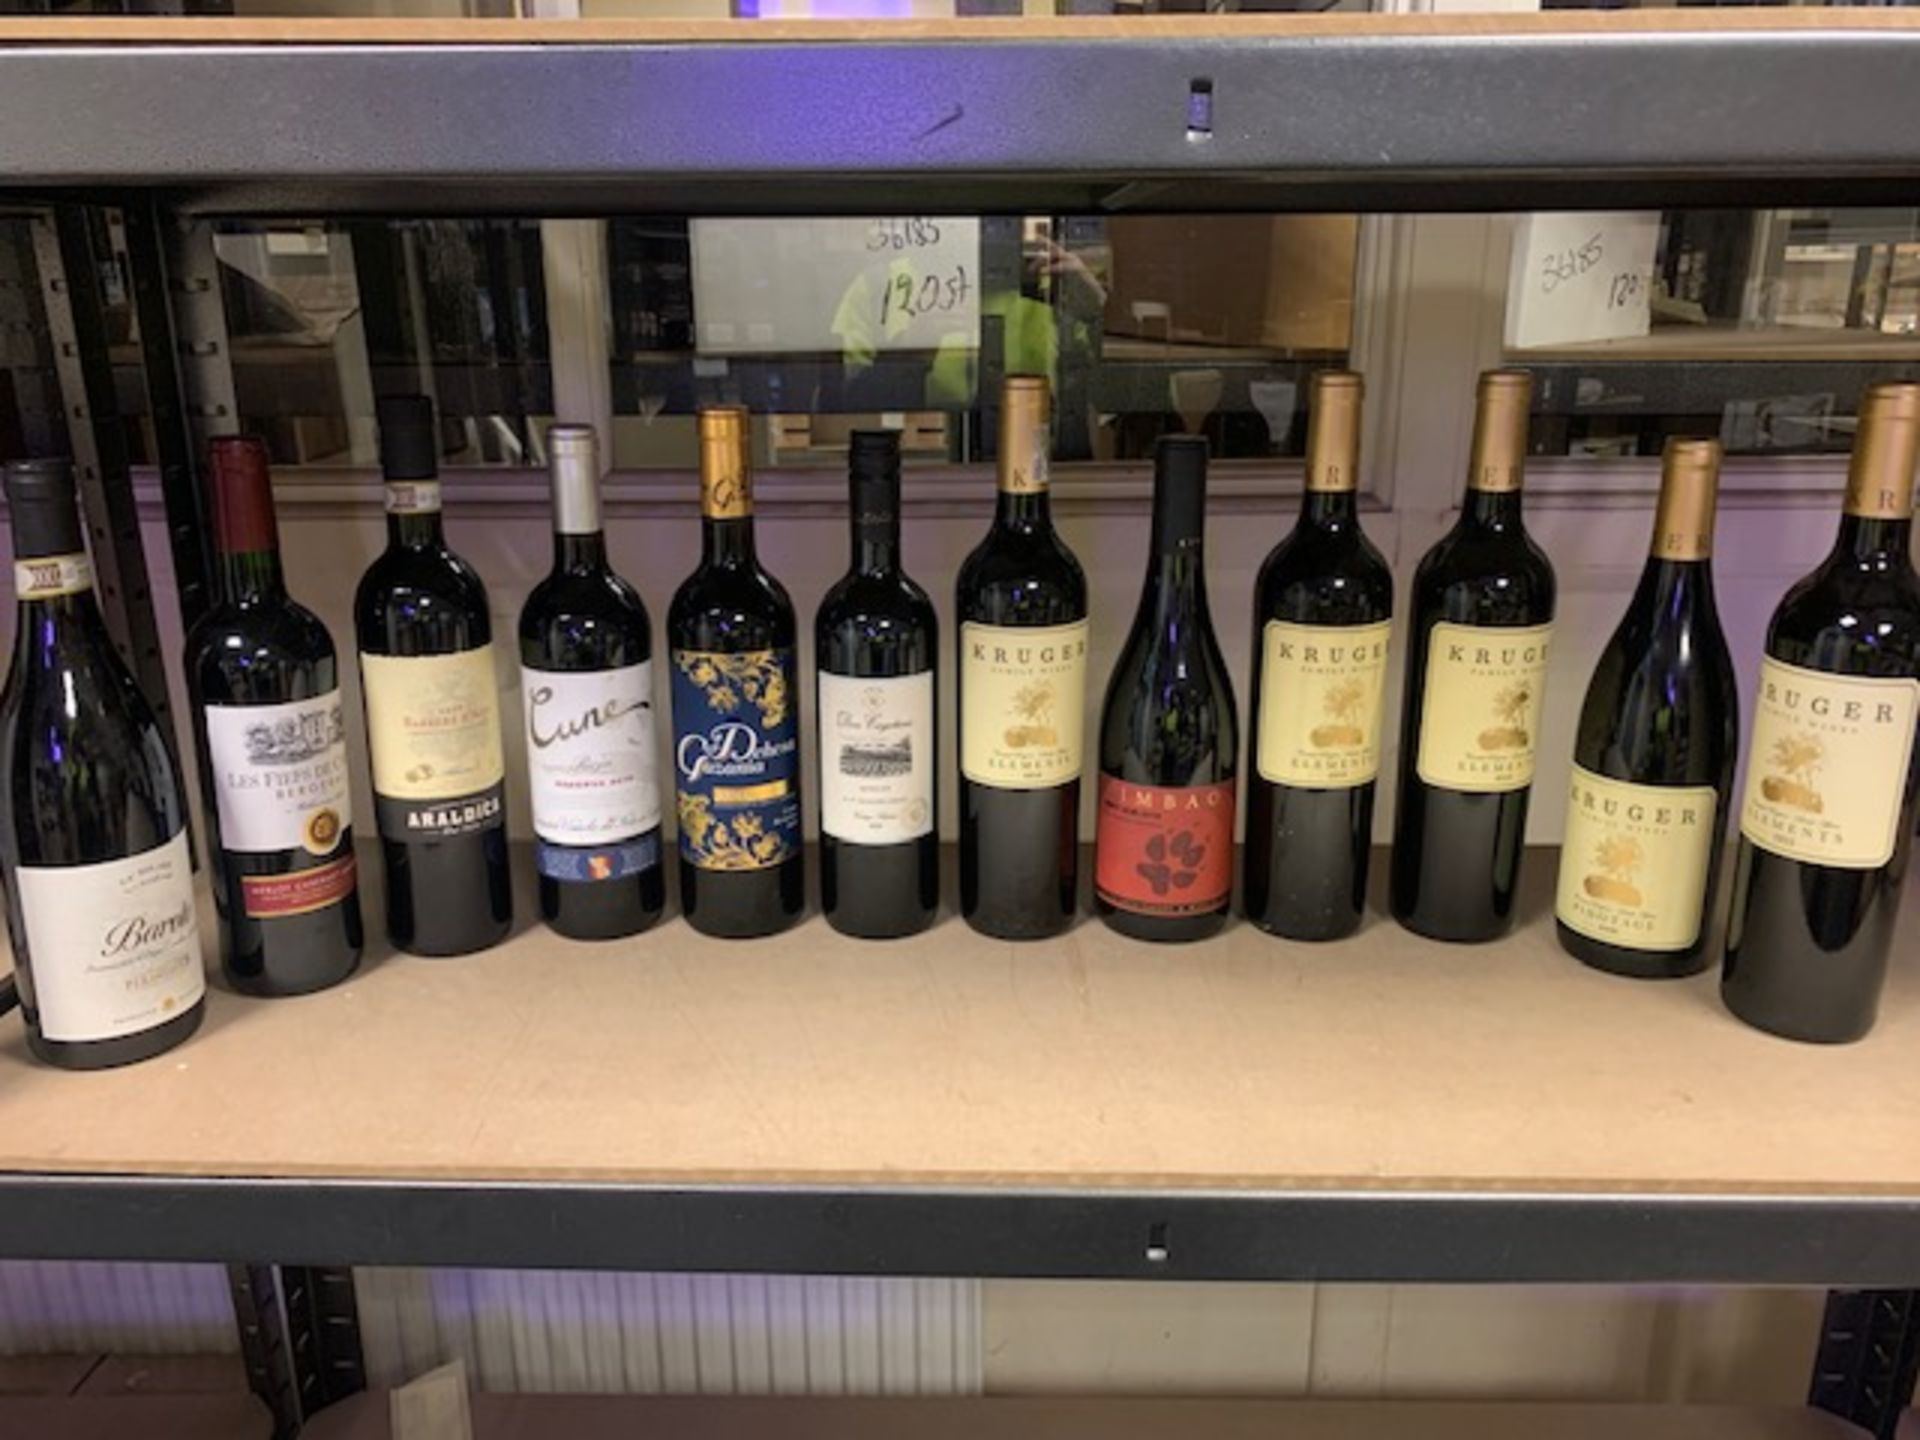 LOT CONTAINING 12 X BOTTLES OF WINE IE KRUGER, KIMBAO, BAROLO. BARBERA D ASTI, ETC